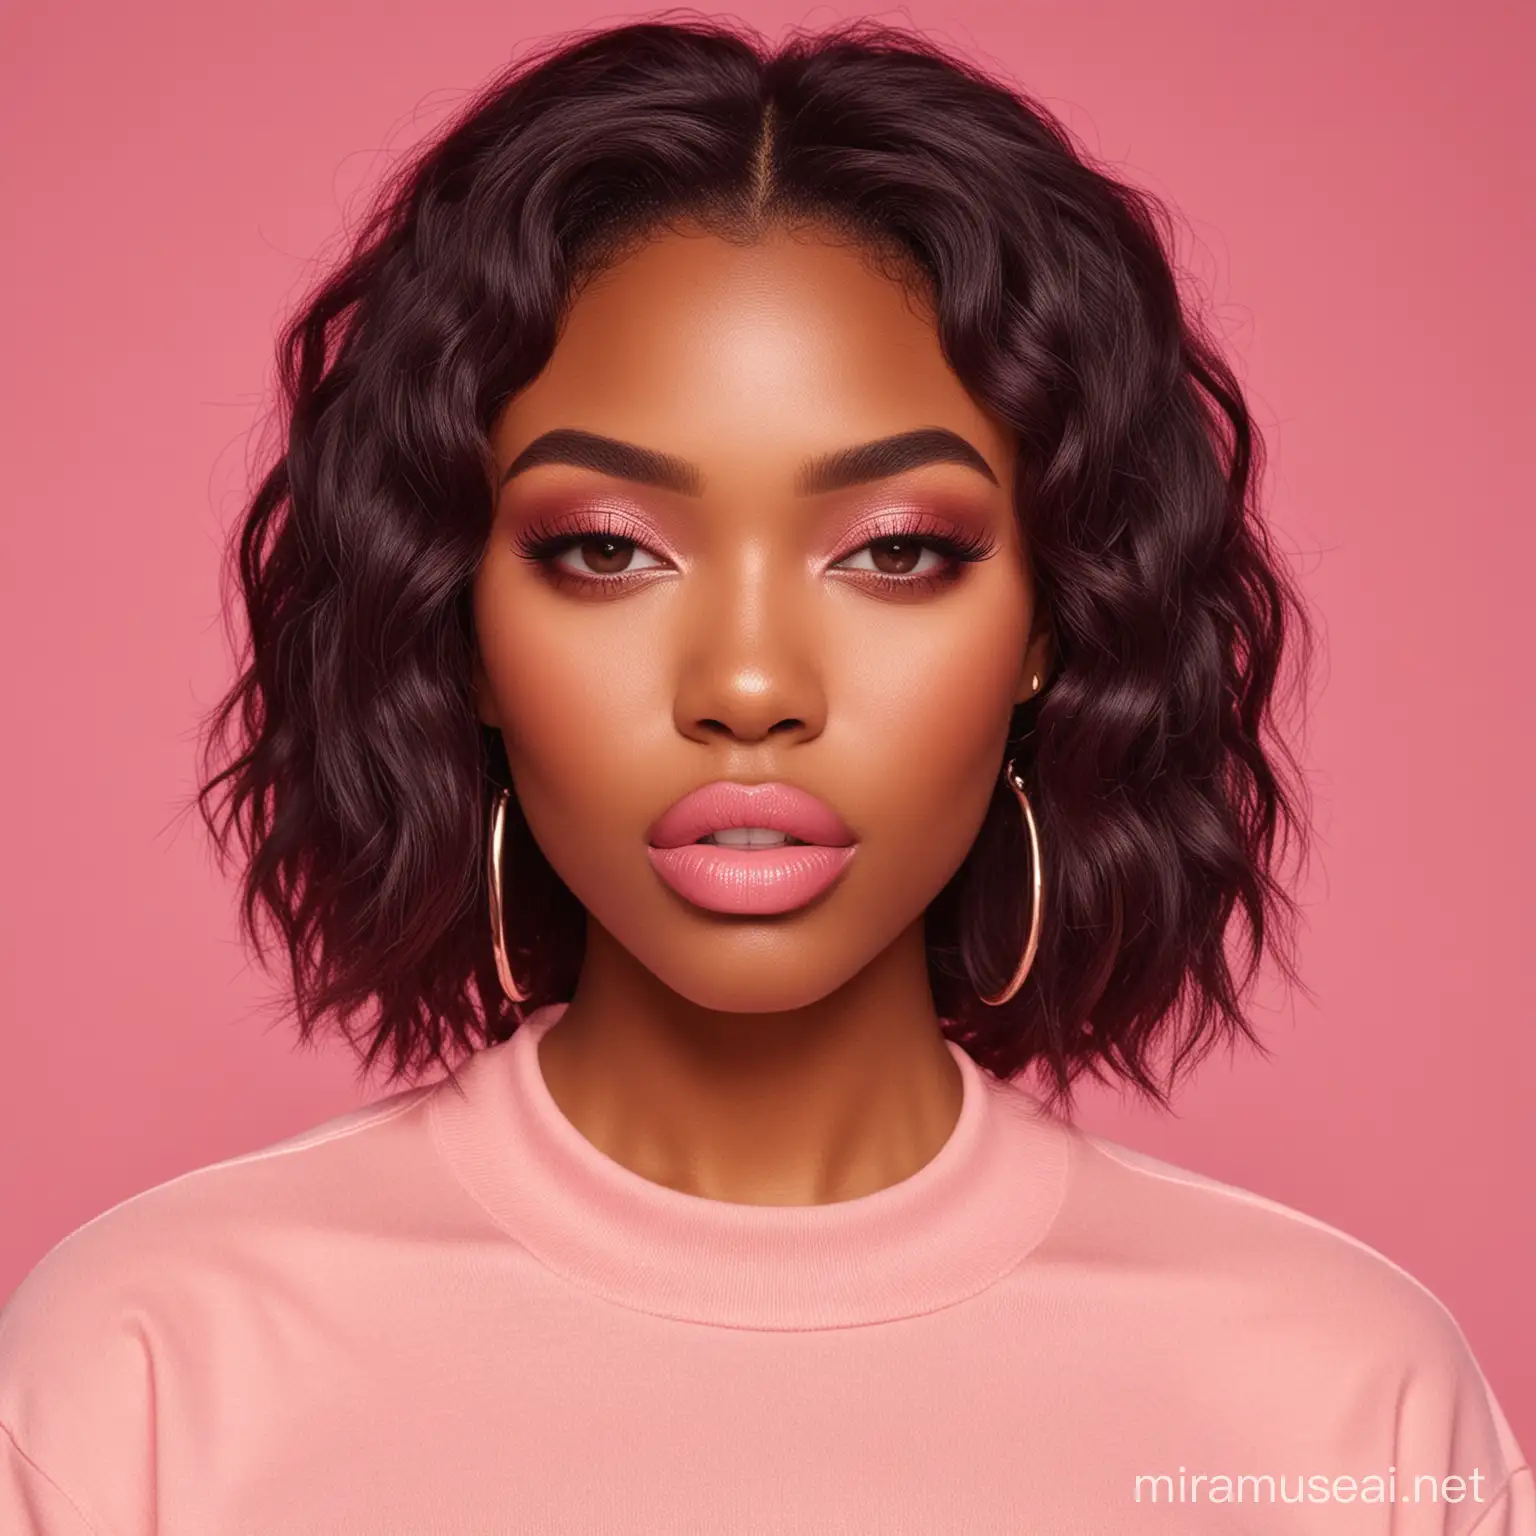 Craft a stunning full portrait shot featuring  African American beauties with plump lips soft layers hair embodying the essence of modern 'Instagram baddies. Showcase their confident allure, merging contemporary style with beauty, perfect for our captivating Clothing  campaign. Pink with pink background